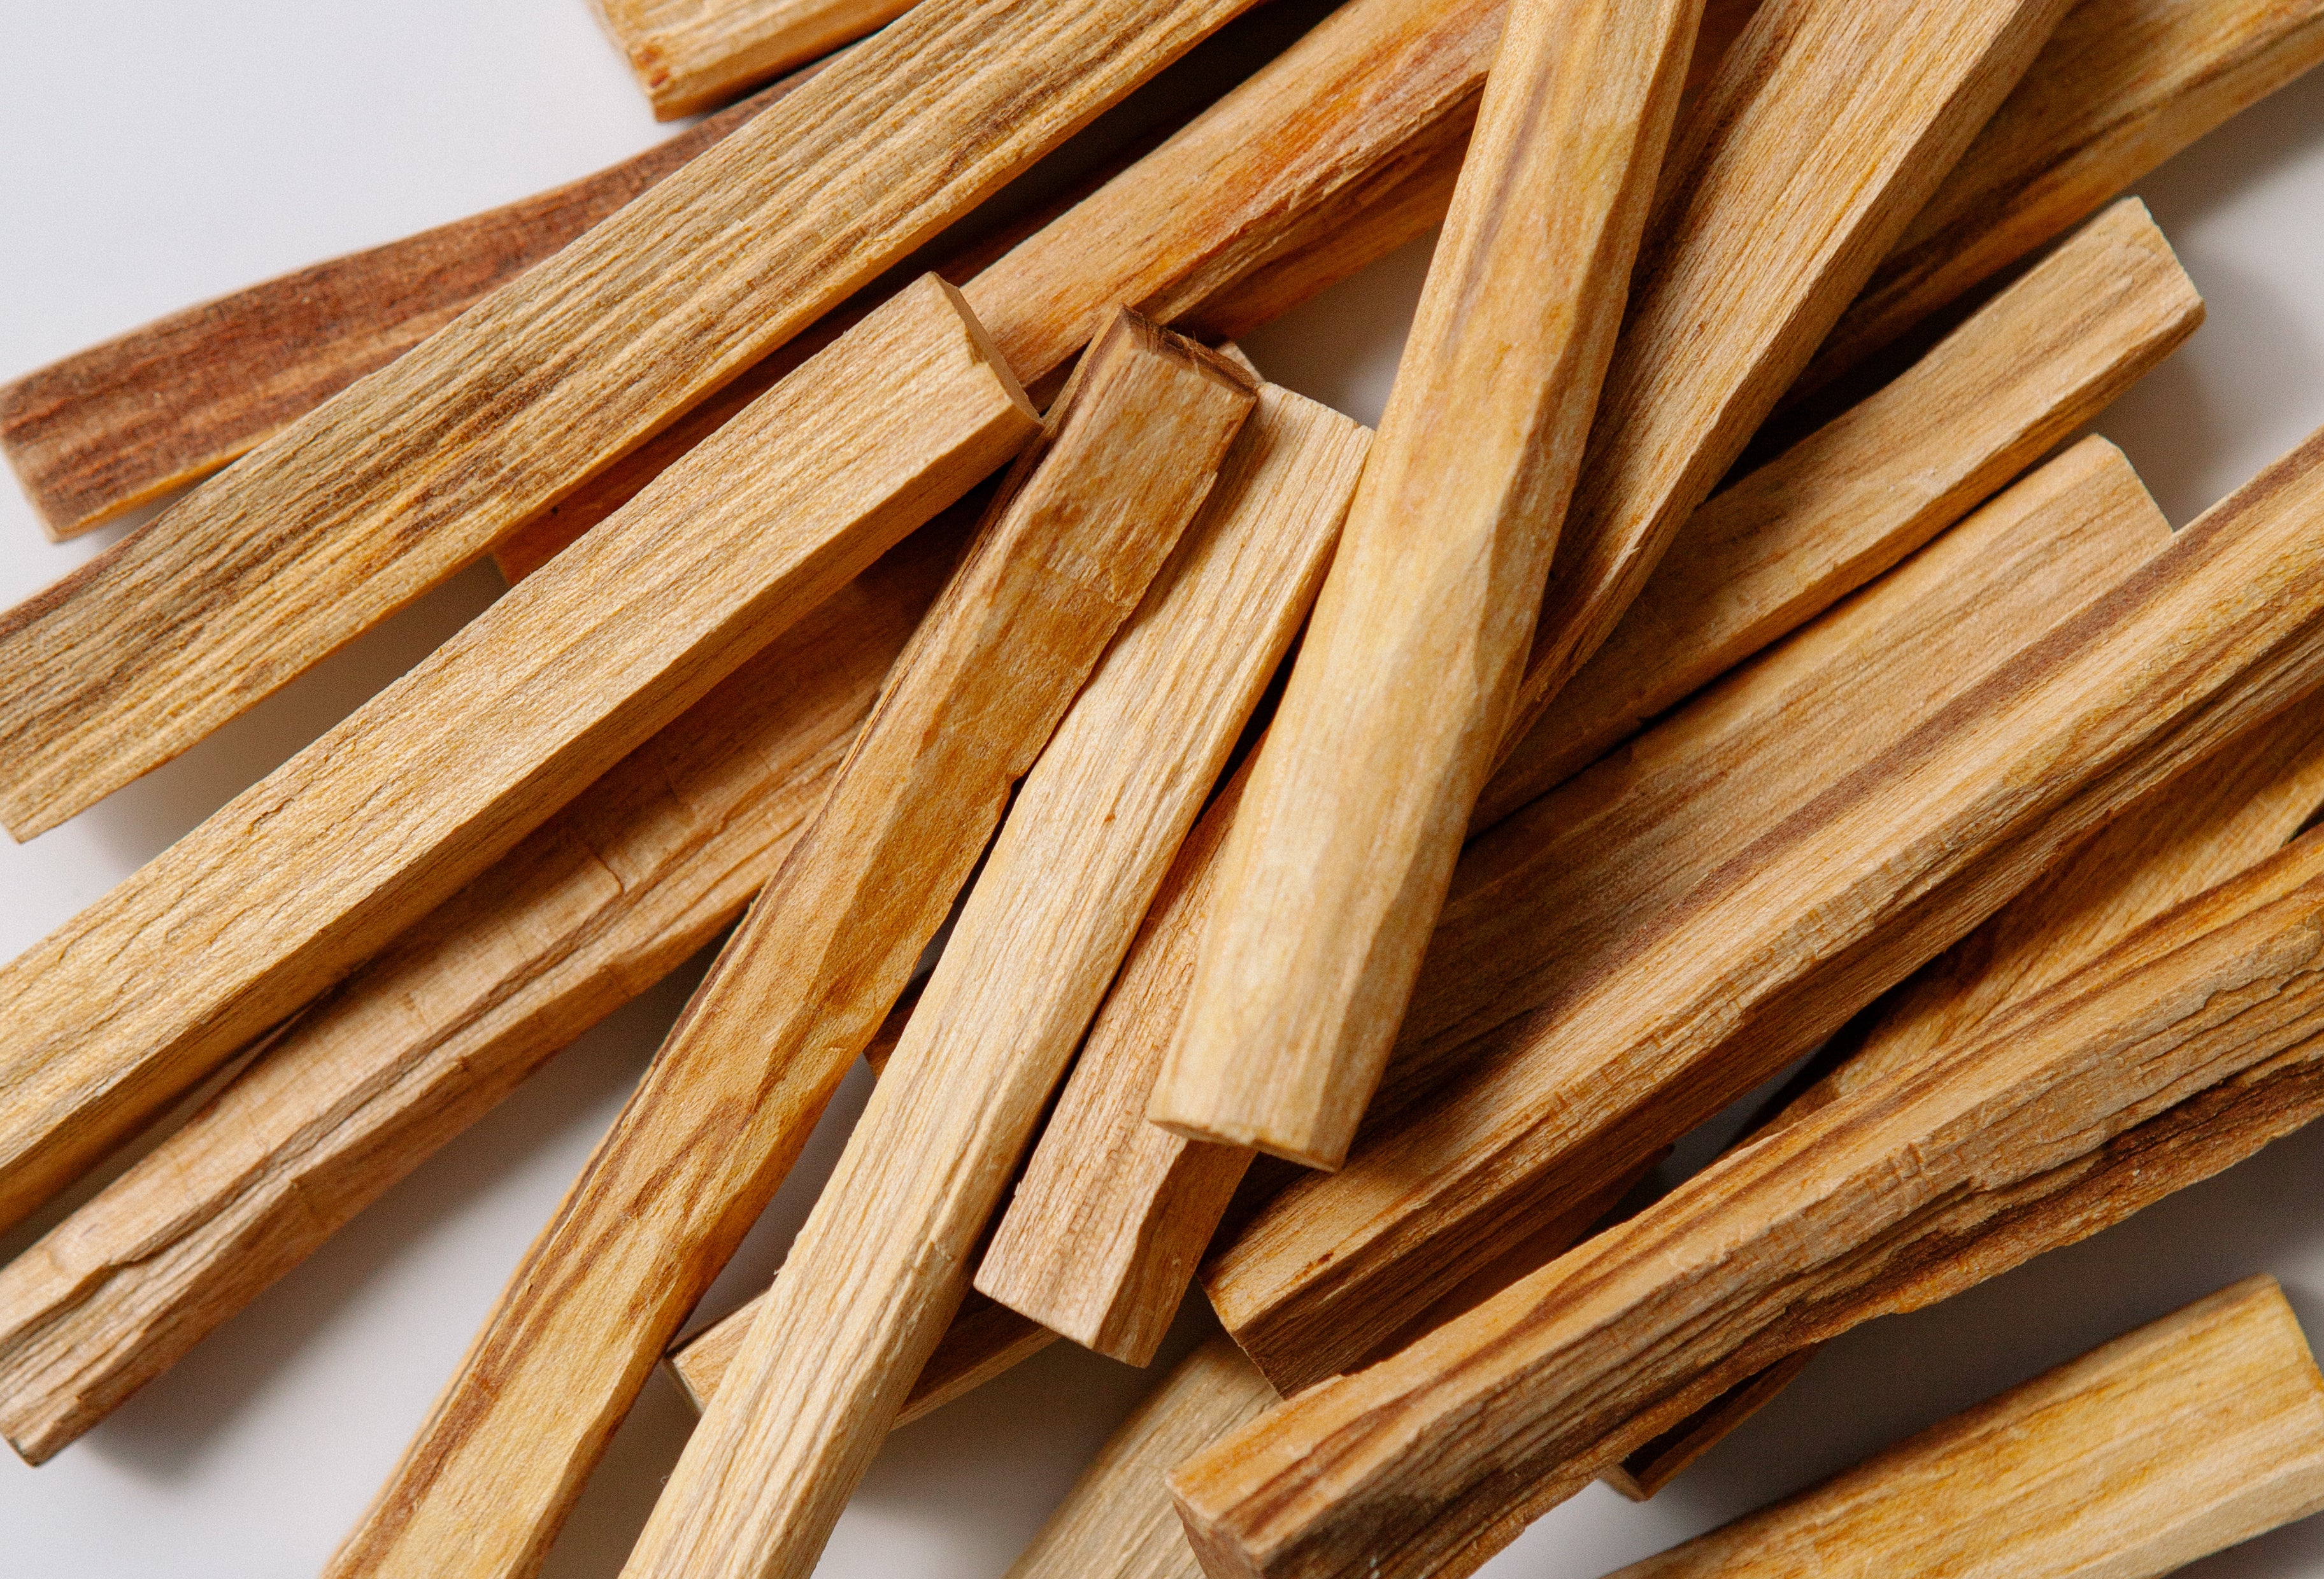 How to Find Good Quality, Sustainably Sourced Palo Santo Wood